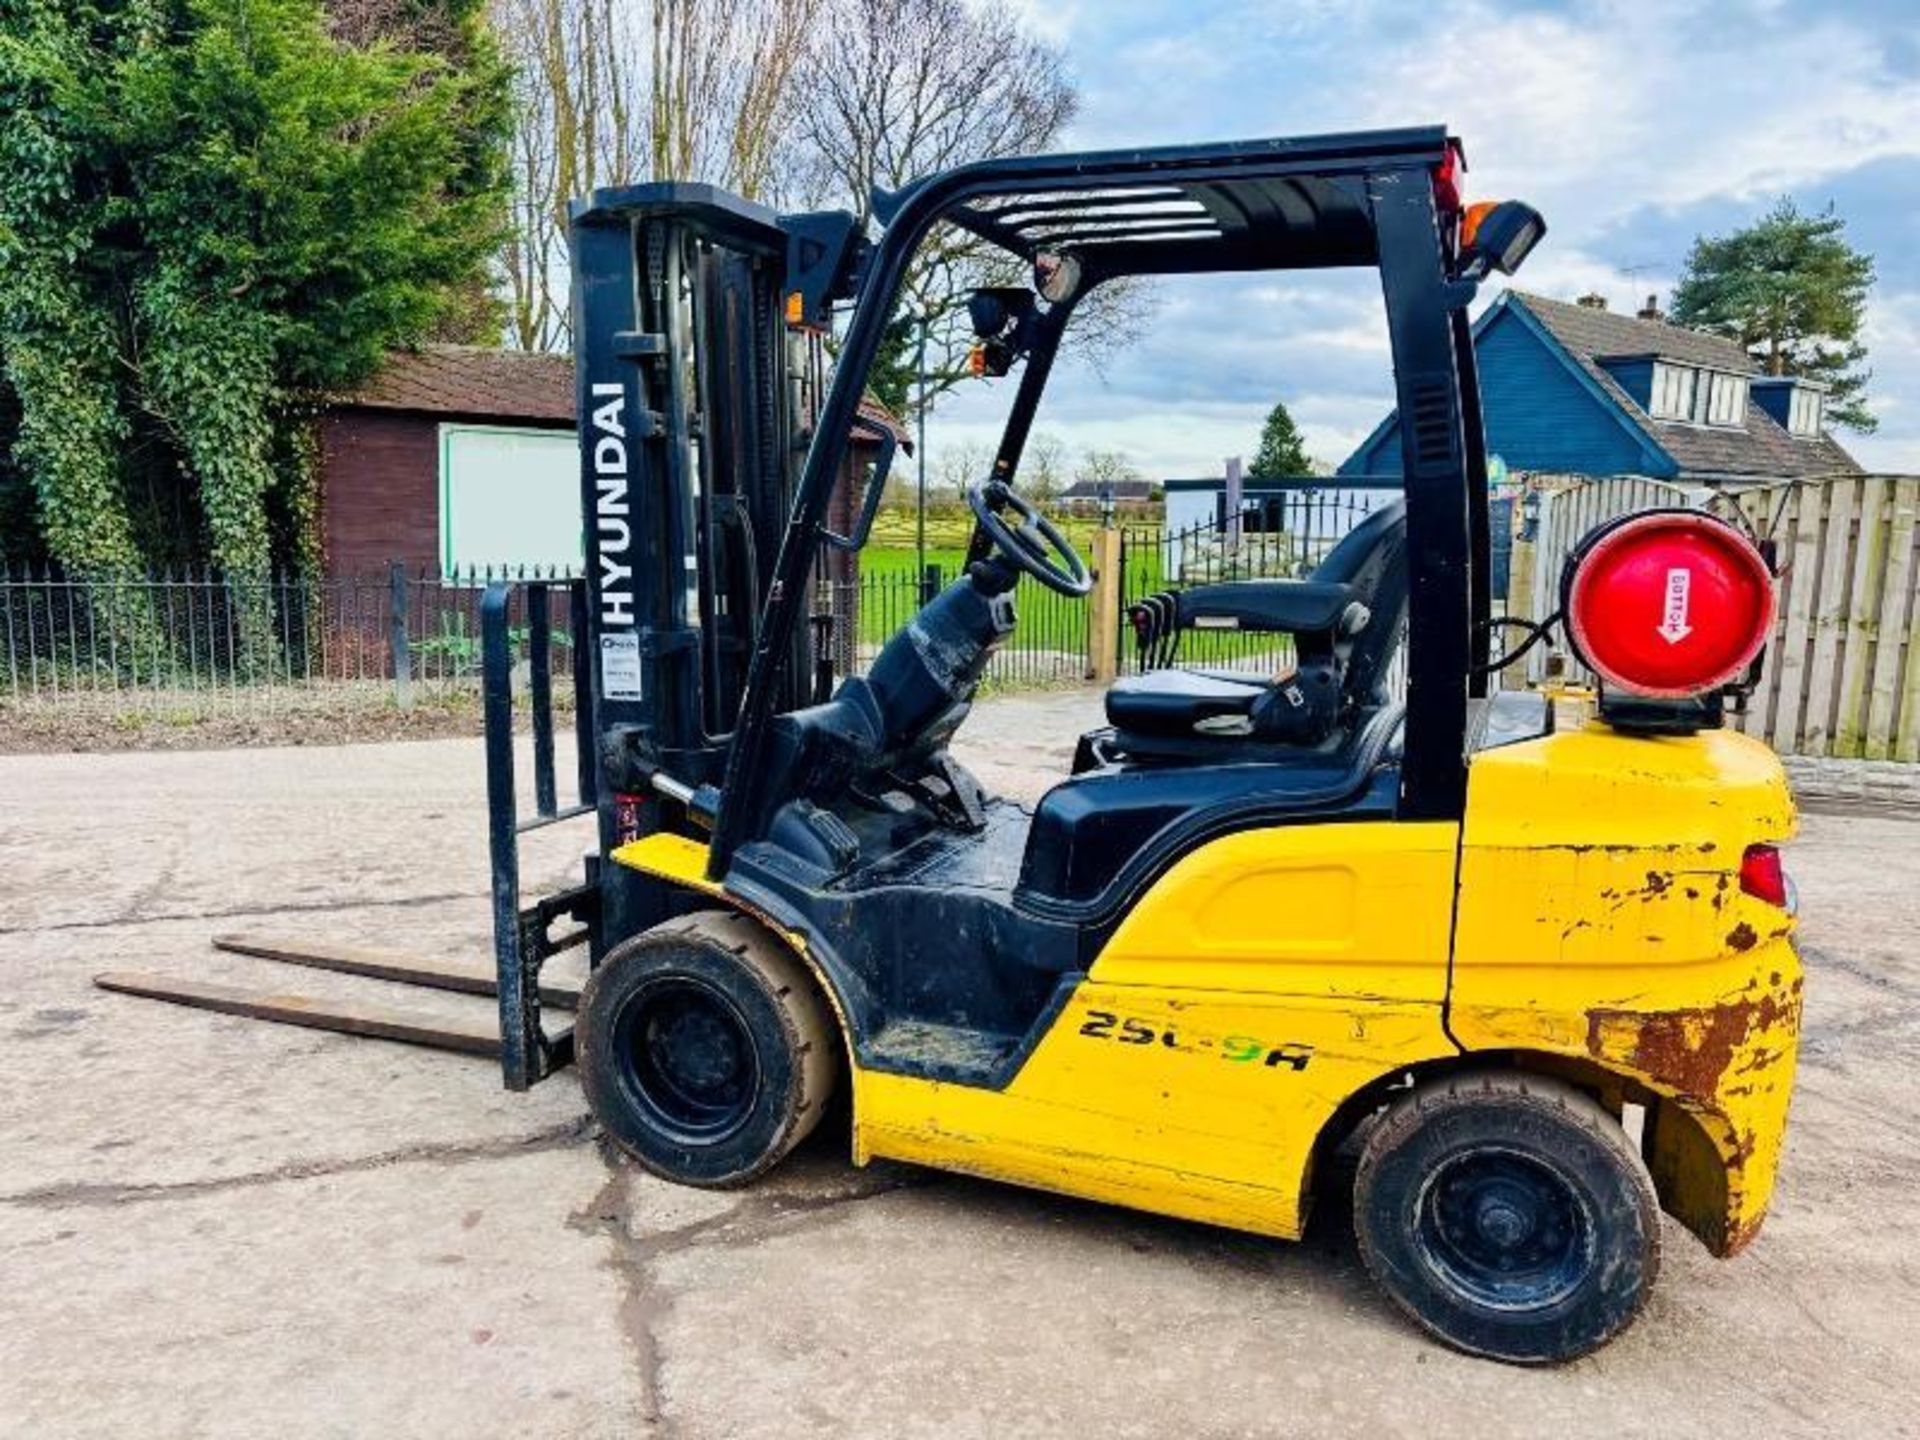 HYUNDAI 25L-9A CONTAINER SPEC FORKLIFT *YEAR 2017, 4463 HOURS* C/W PALLET TINES - Image 2 of 18